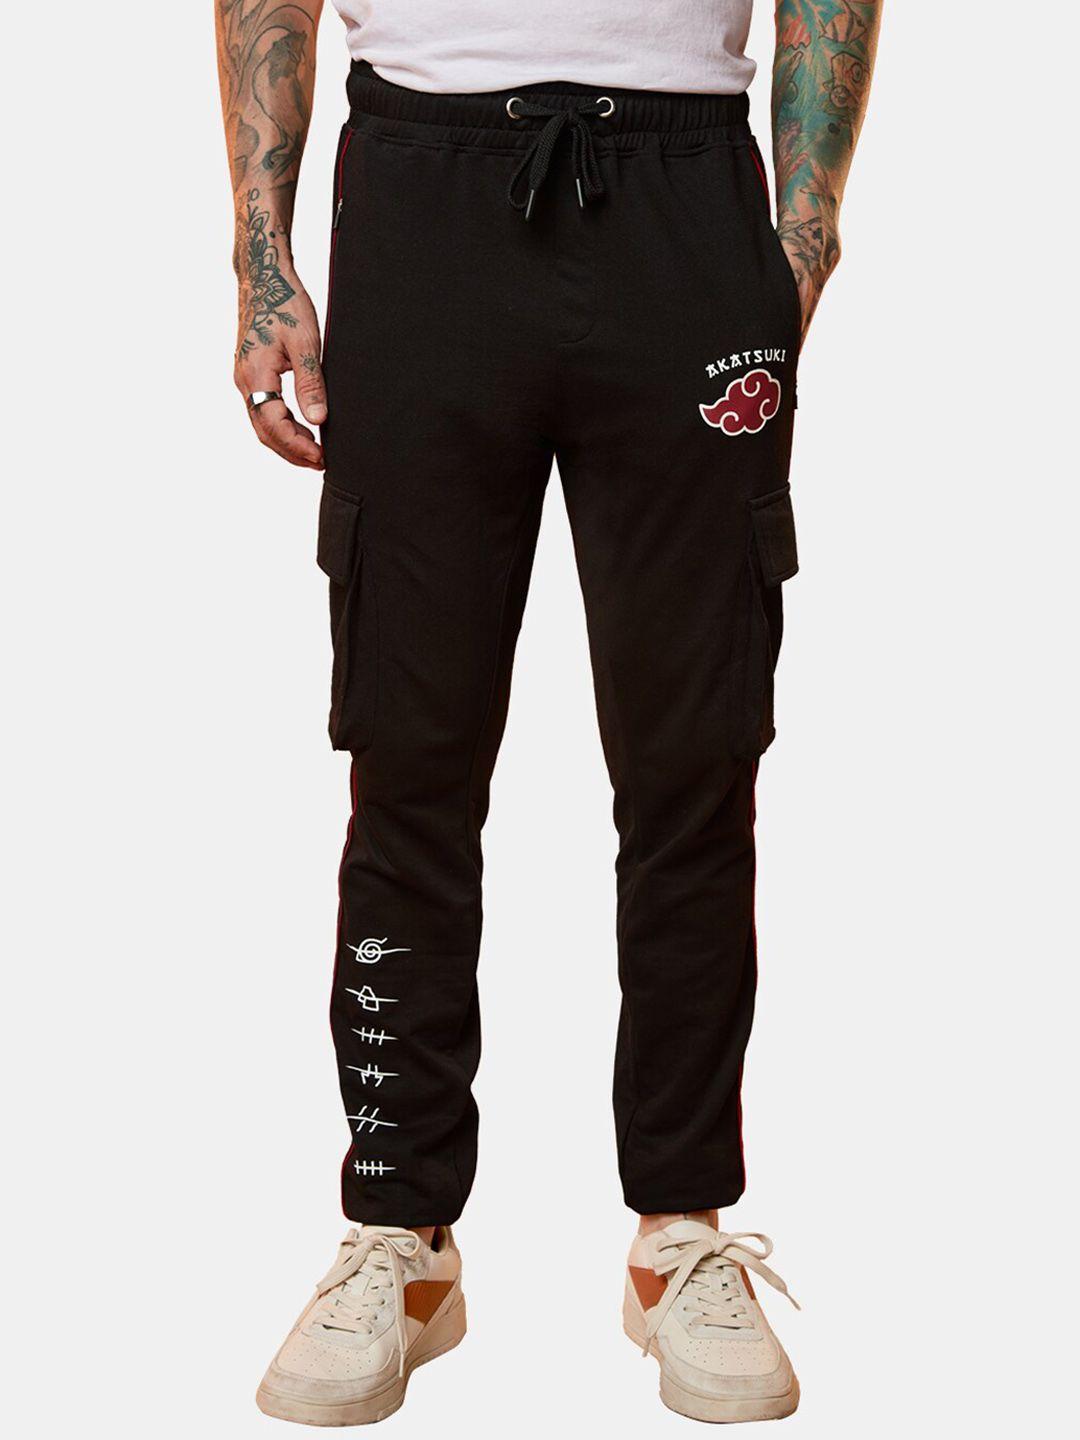 the souled store men cotton printed track pants